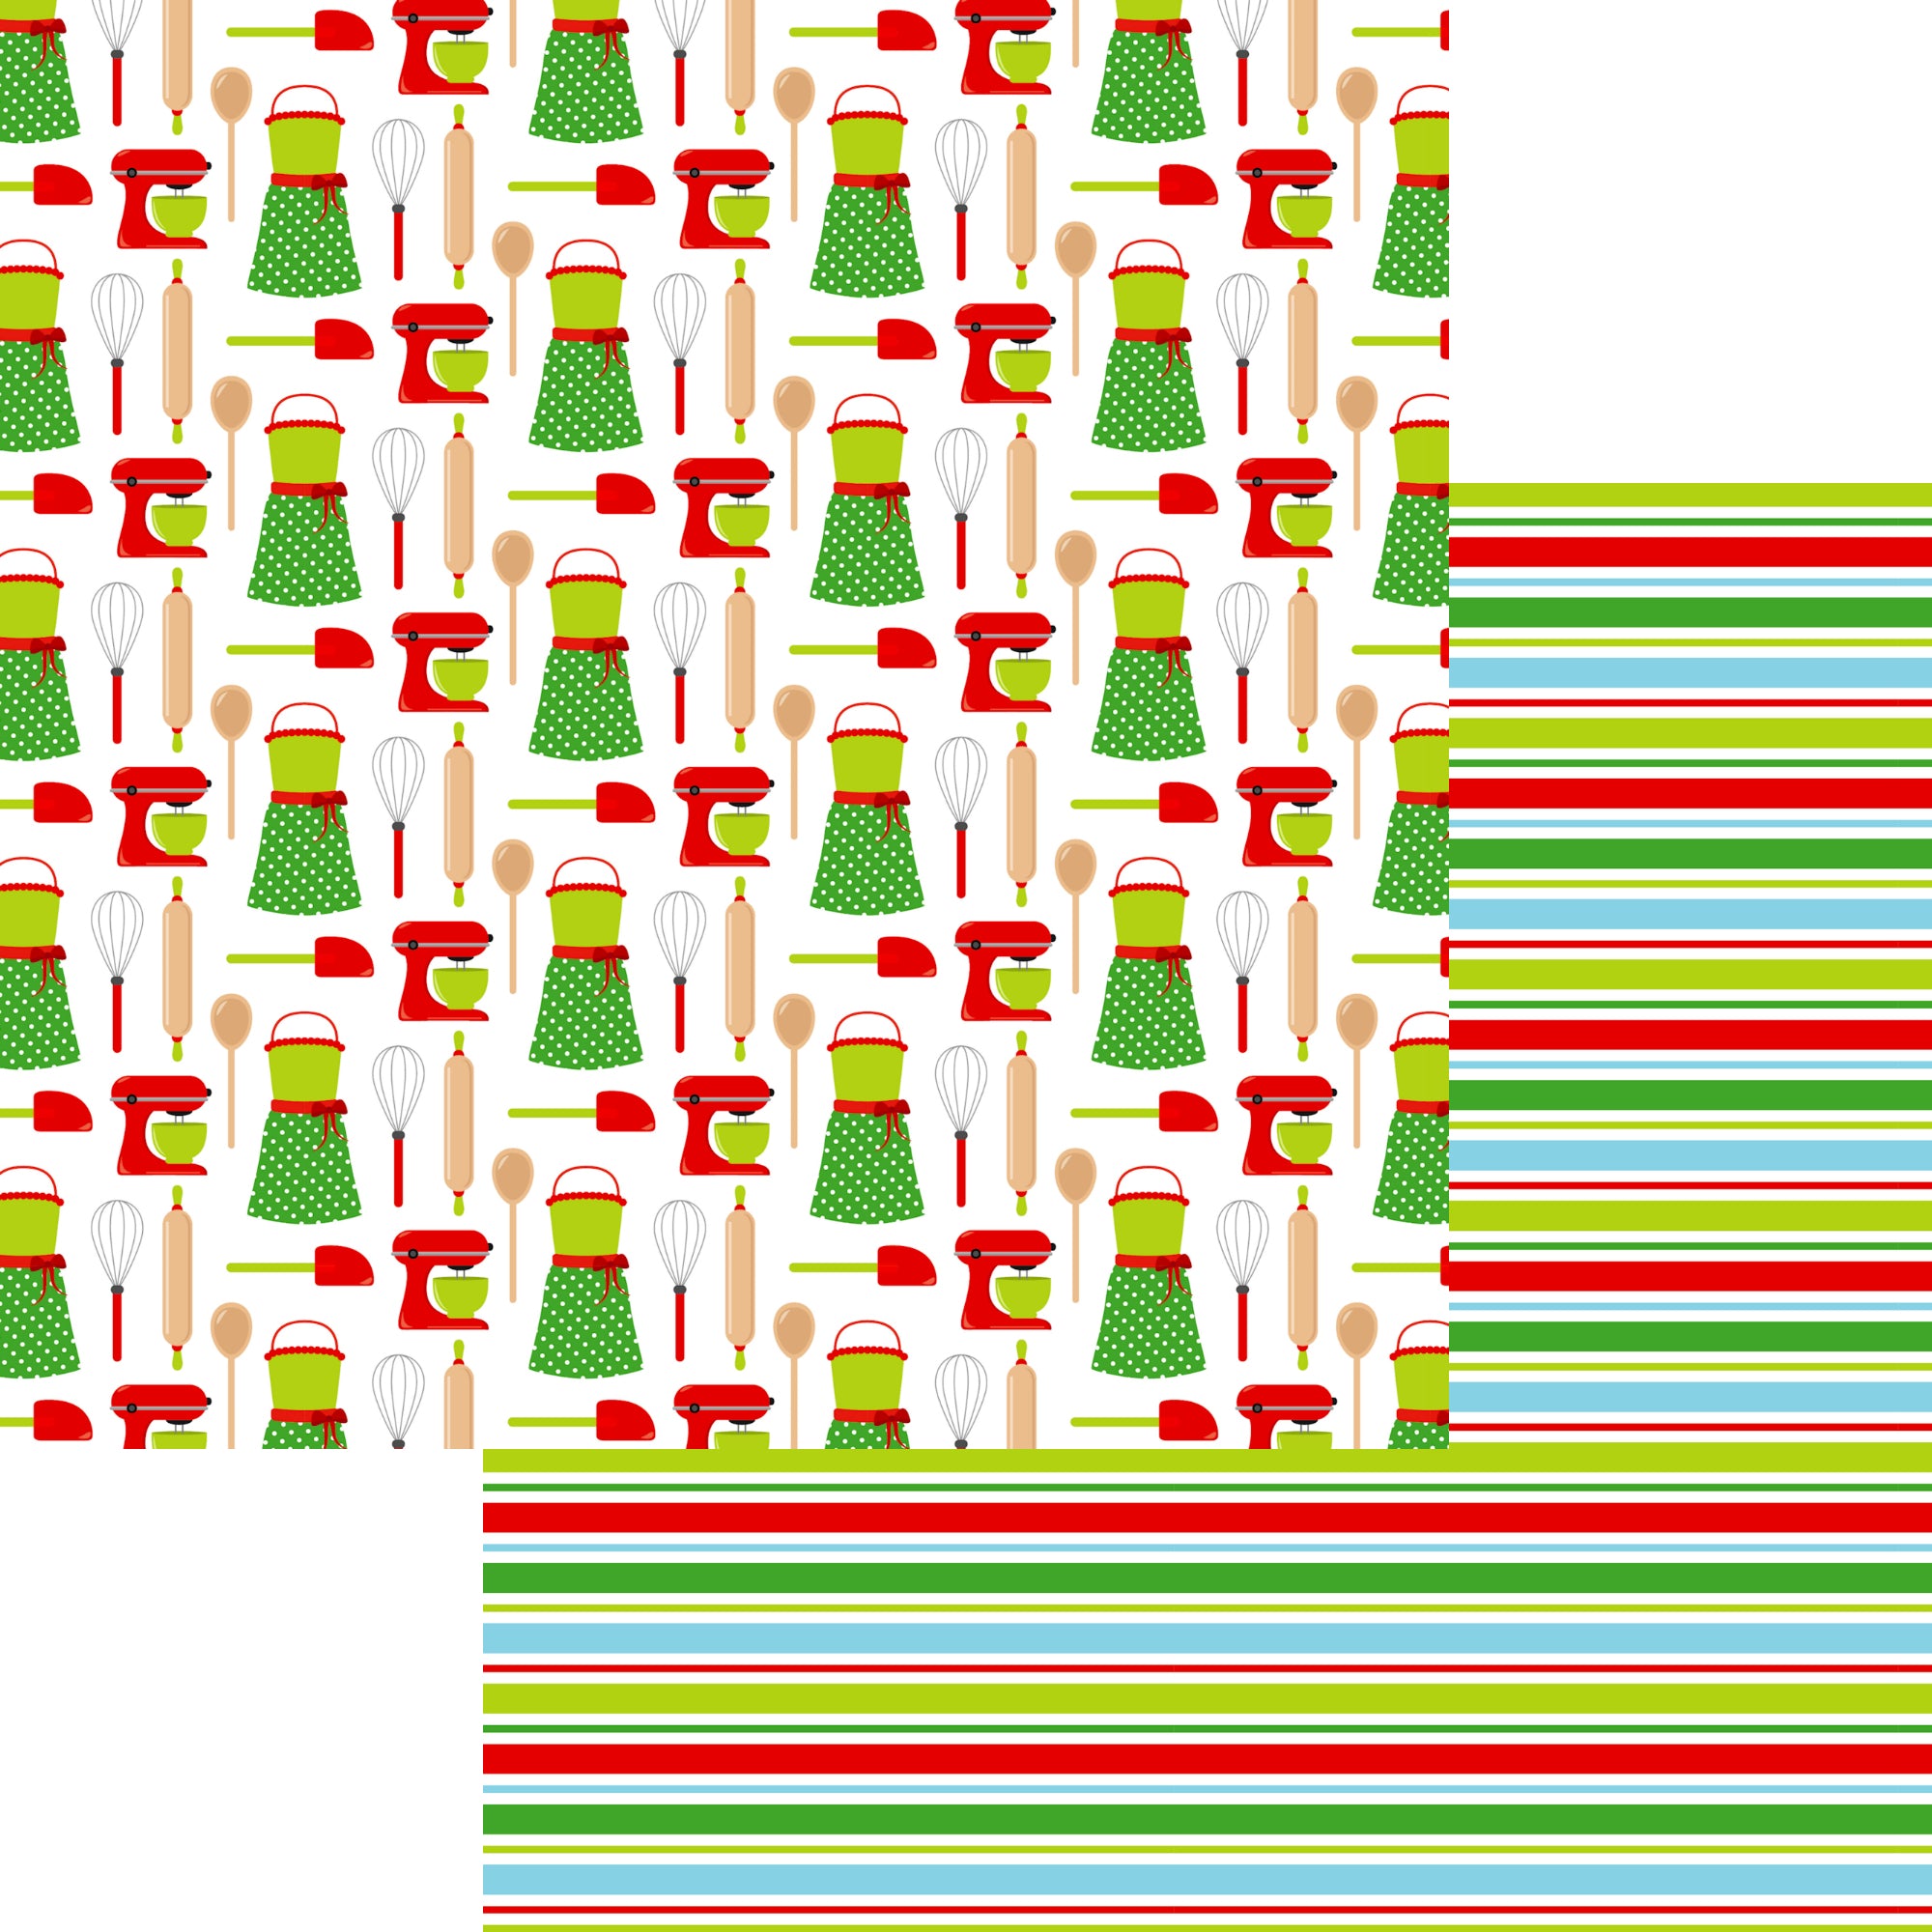 Christmas Baking Collection Aprons A Plenty 12 x 12 Double-Sided Scrapbook Paper by SSC Designs